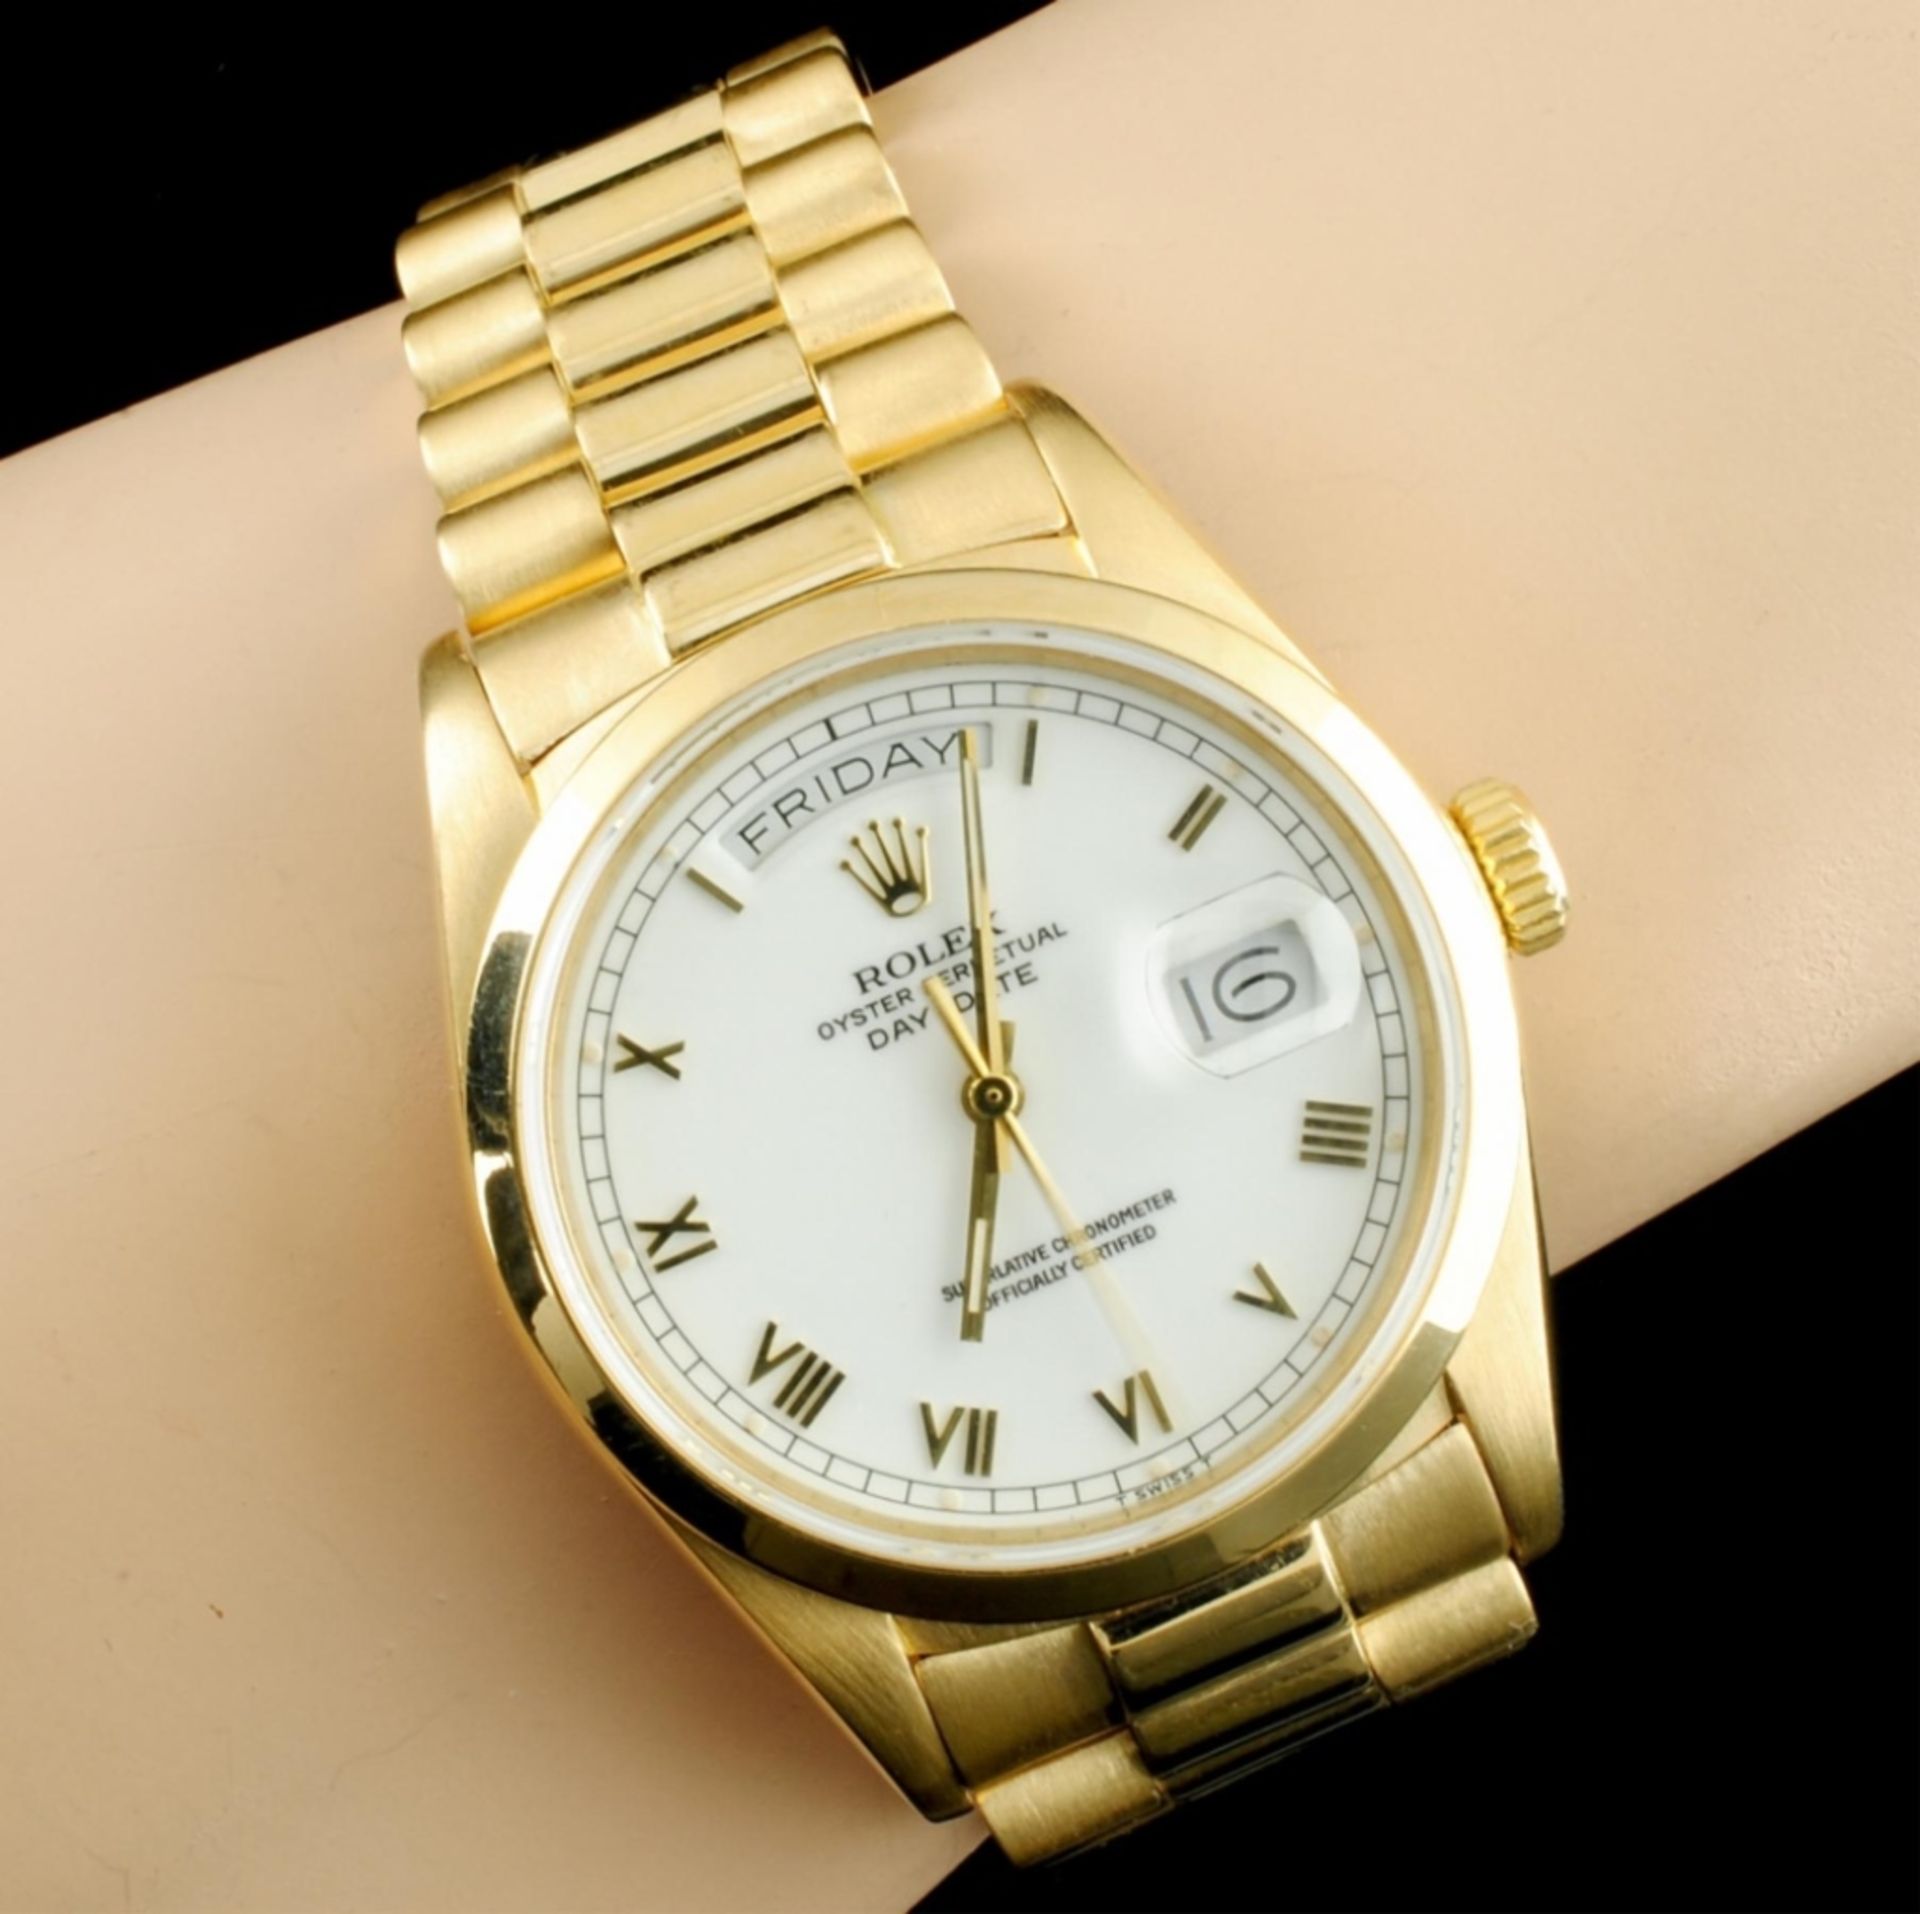 Rolex Day-Date 18K Gold White Roman 36MM Watch - Image 5 of 6